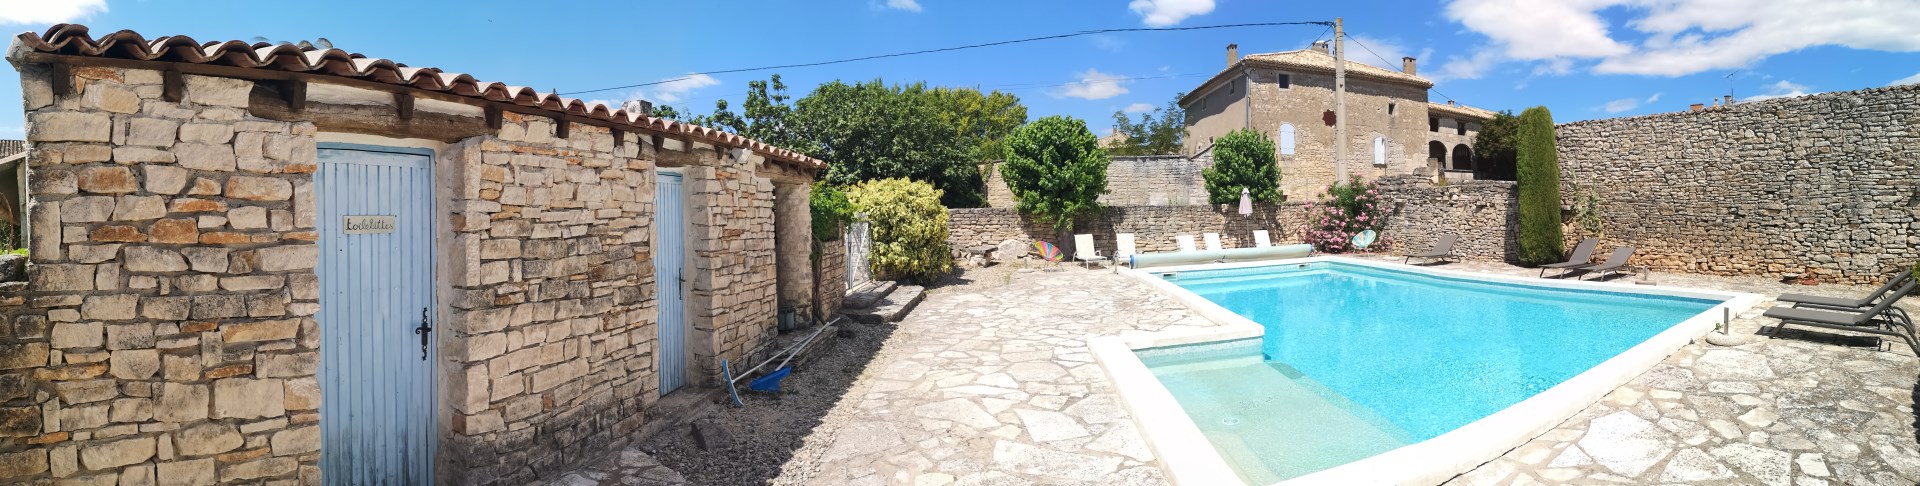 Gîte with pool in Provence